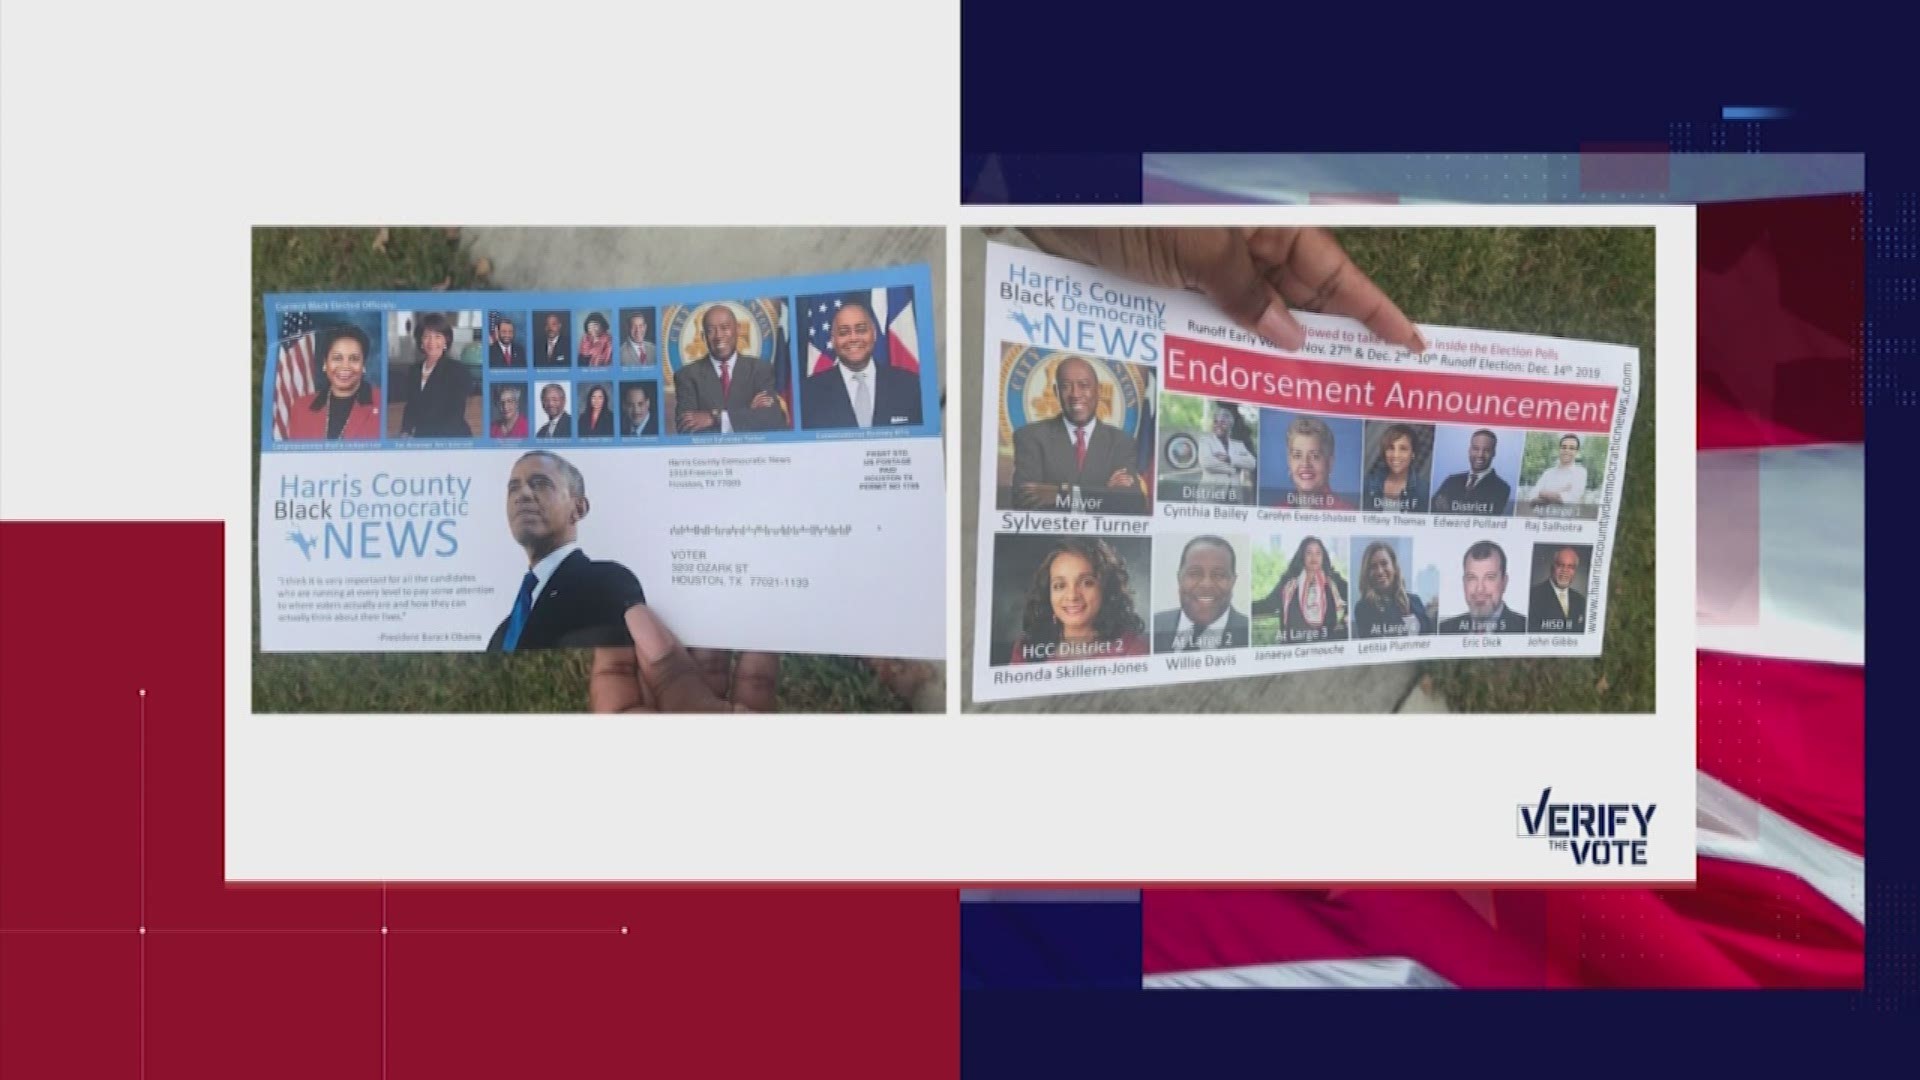 The mailer in question is being circulated by a group called the Harris County Democratic News.